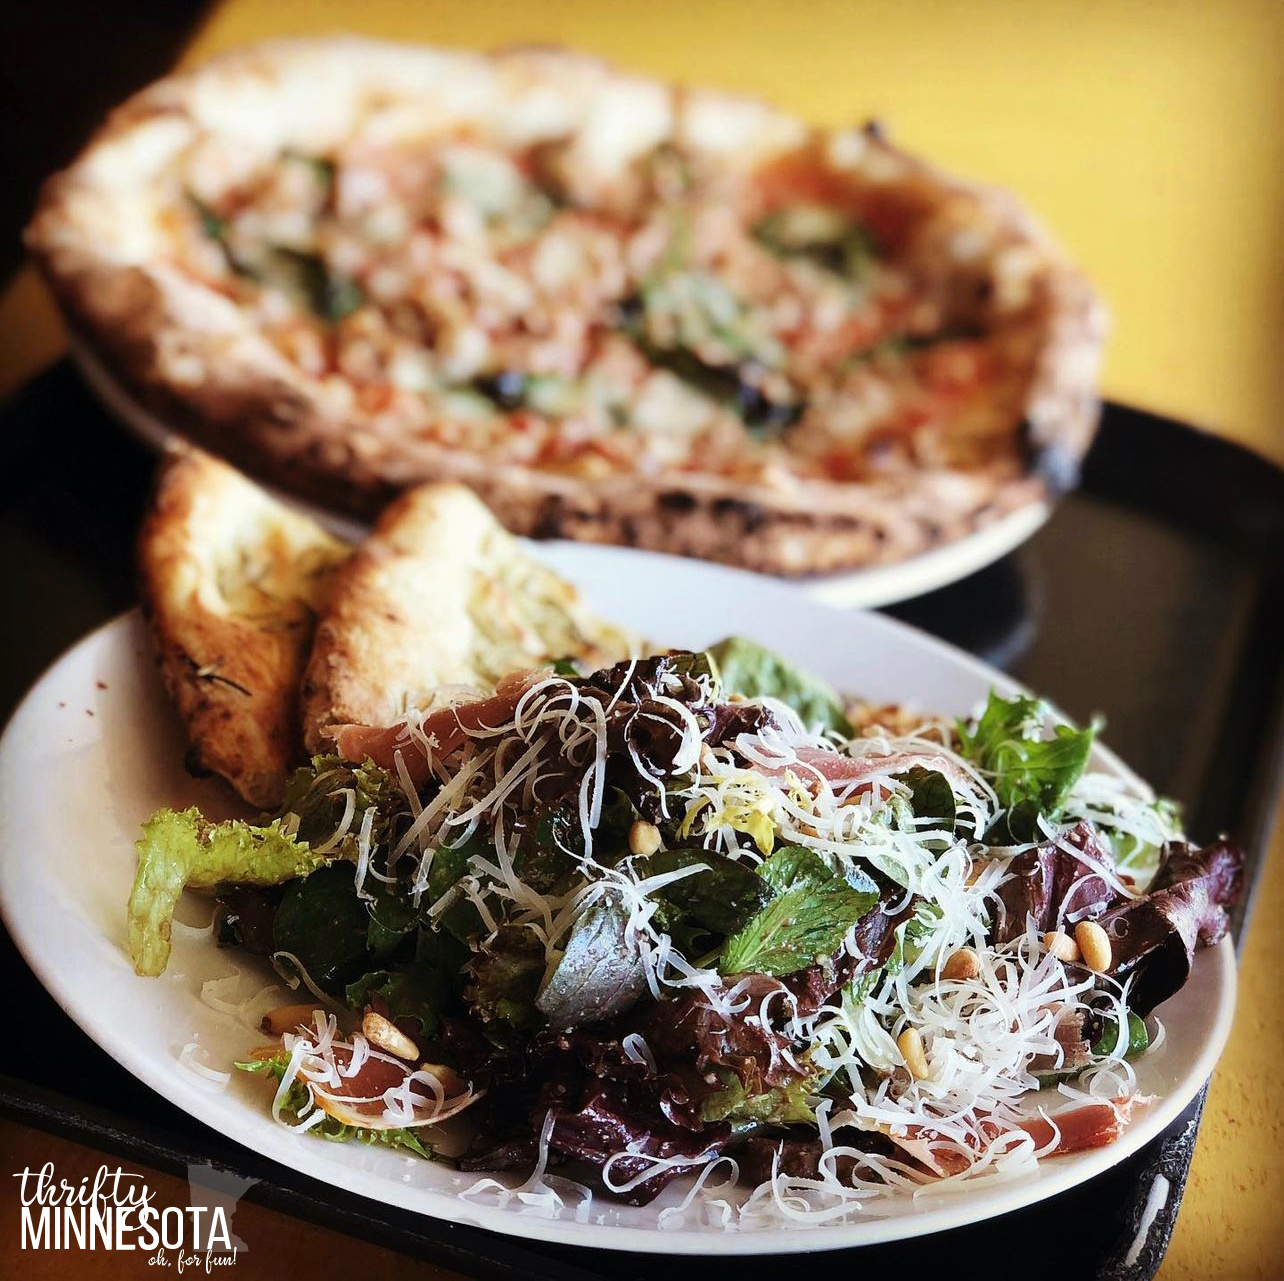 Punch Pizza and Salad